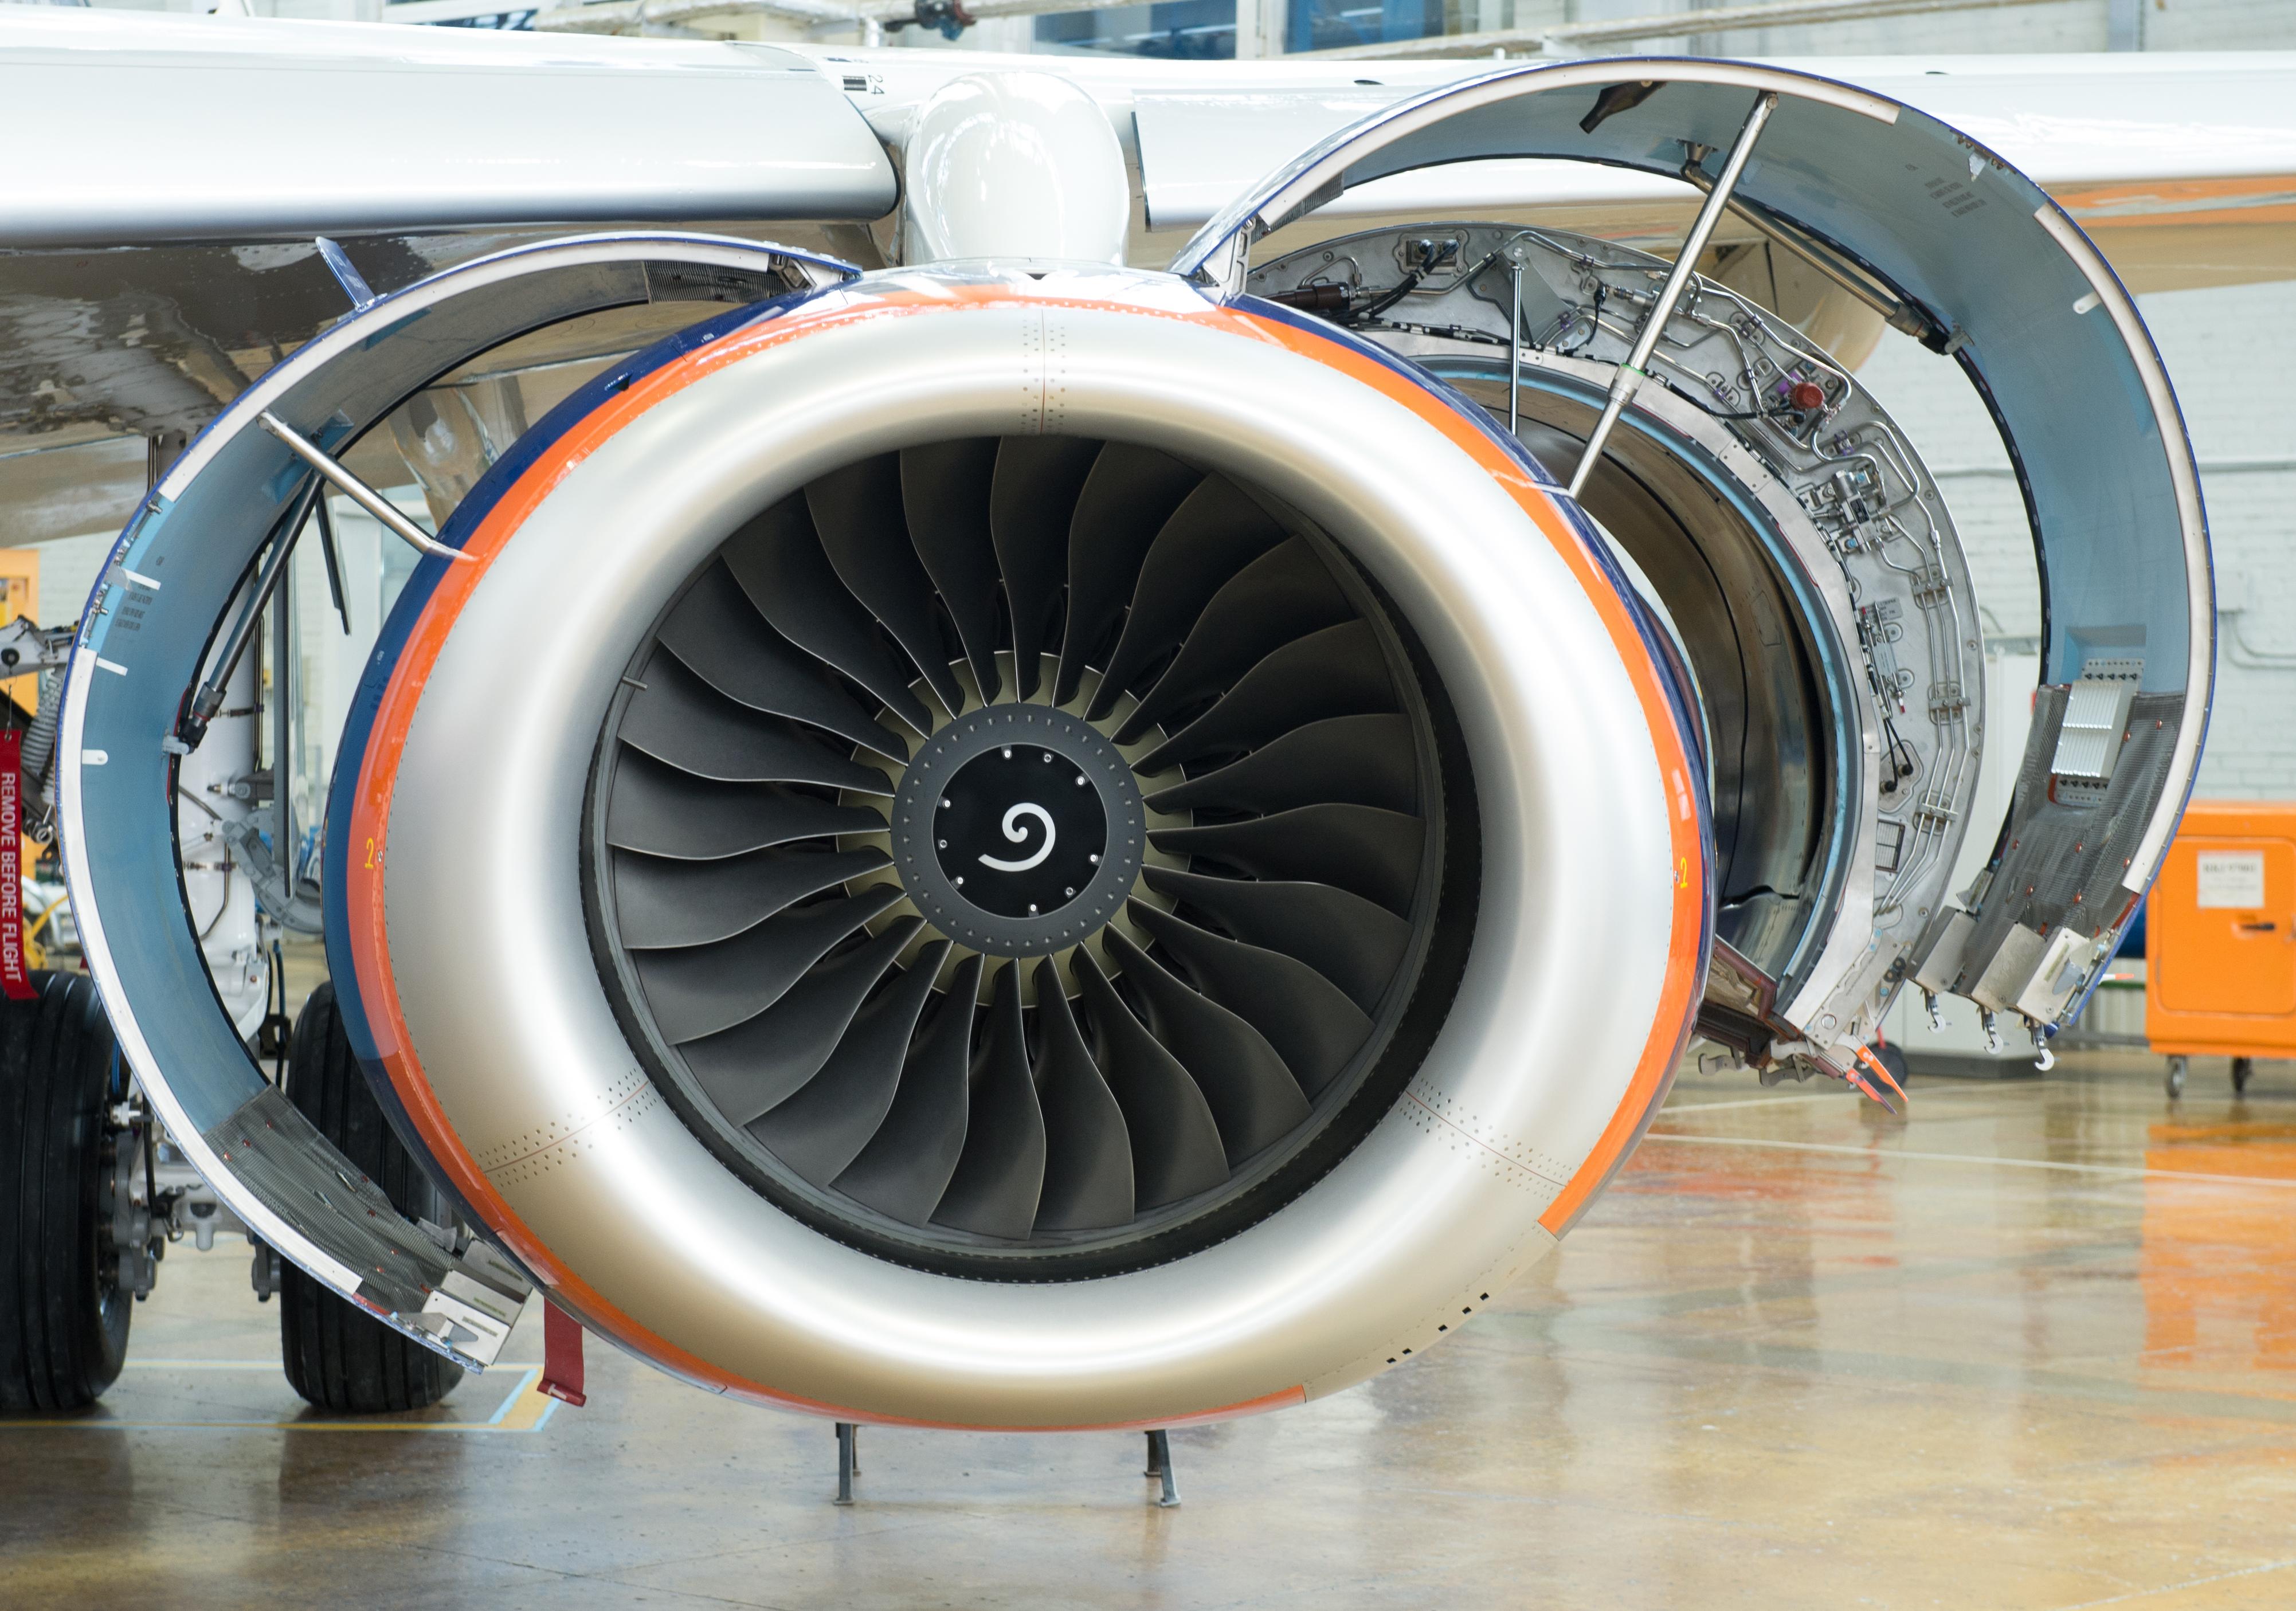 SaM146 Engines Reached 300 Thousand Hours of Service on Aeroflot Airliners